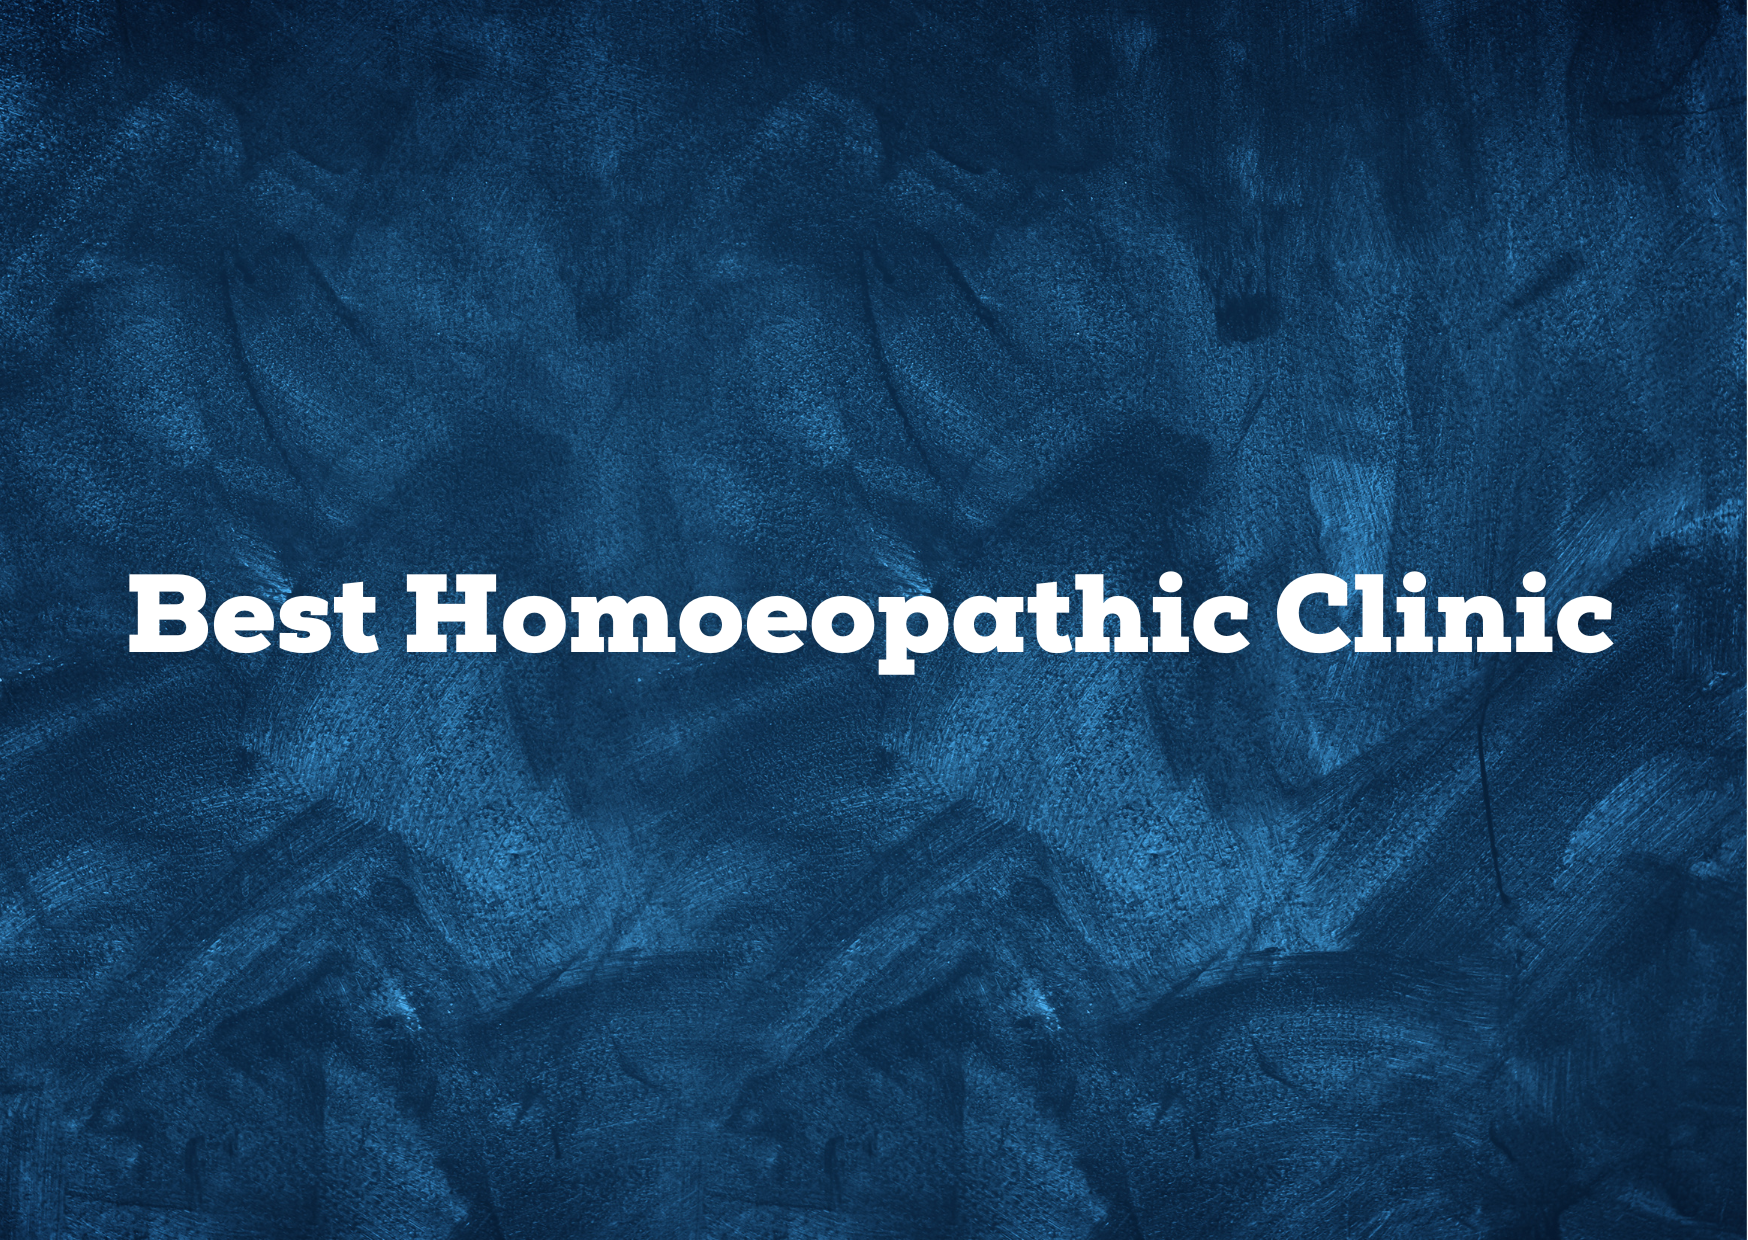 Best Homoeopathic Clinic